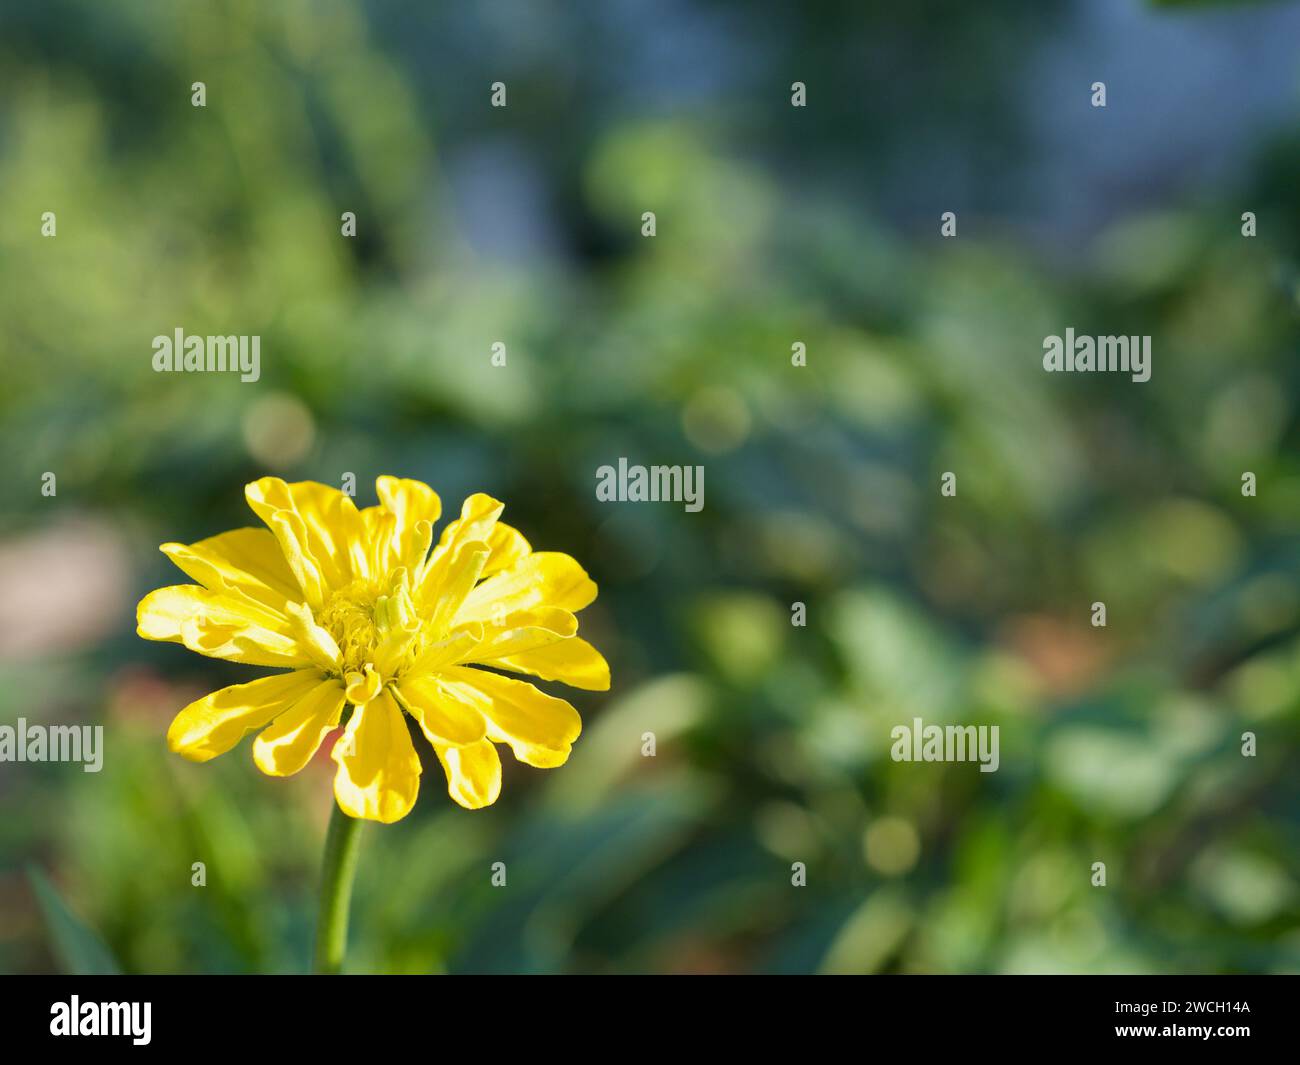 A vibrant yellow flower stands out in a lush field of green grass Stock Photo